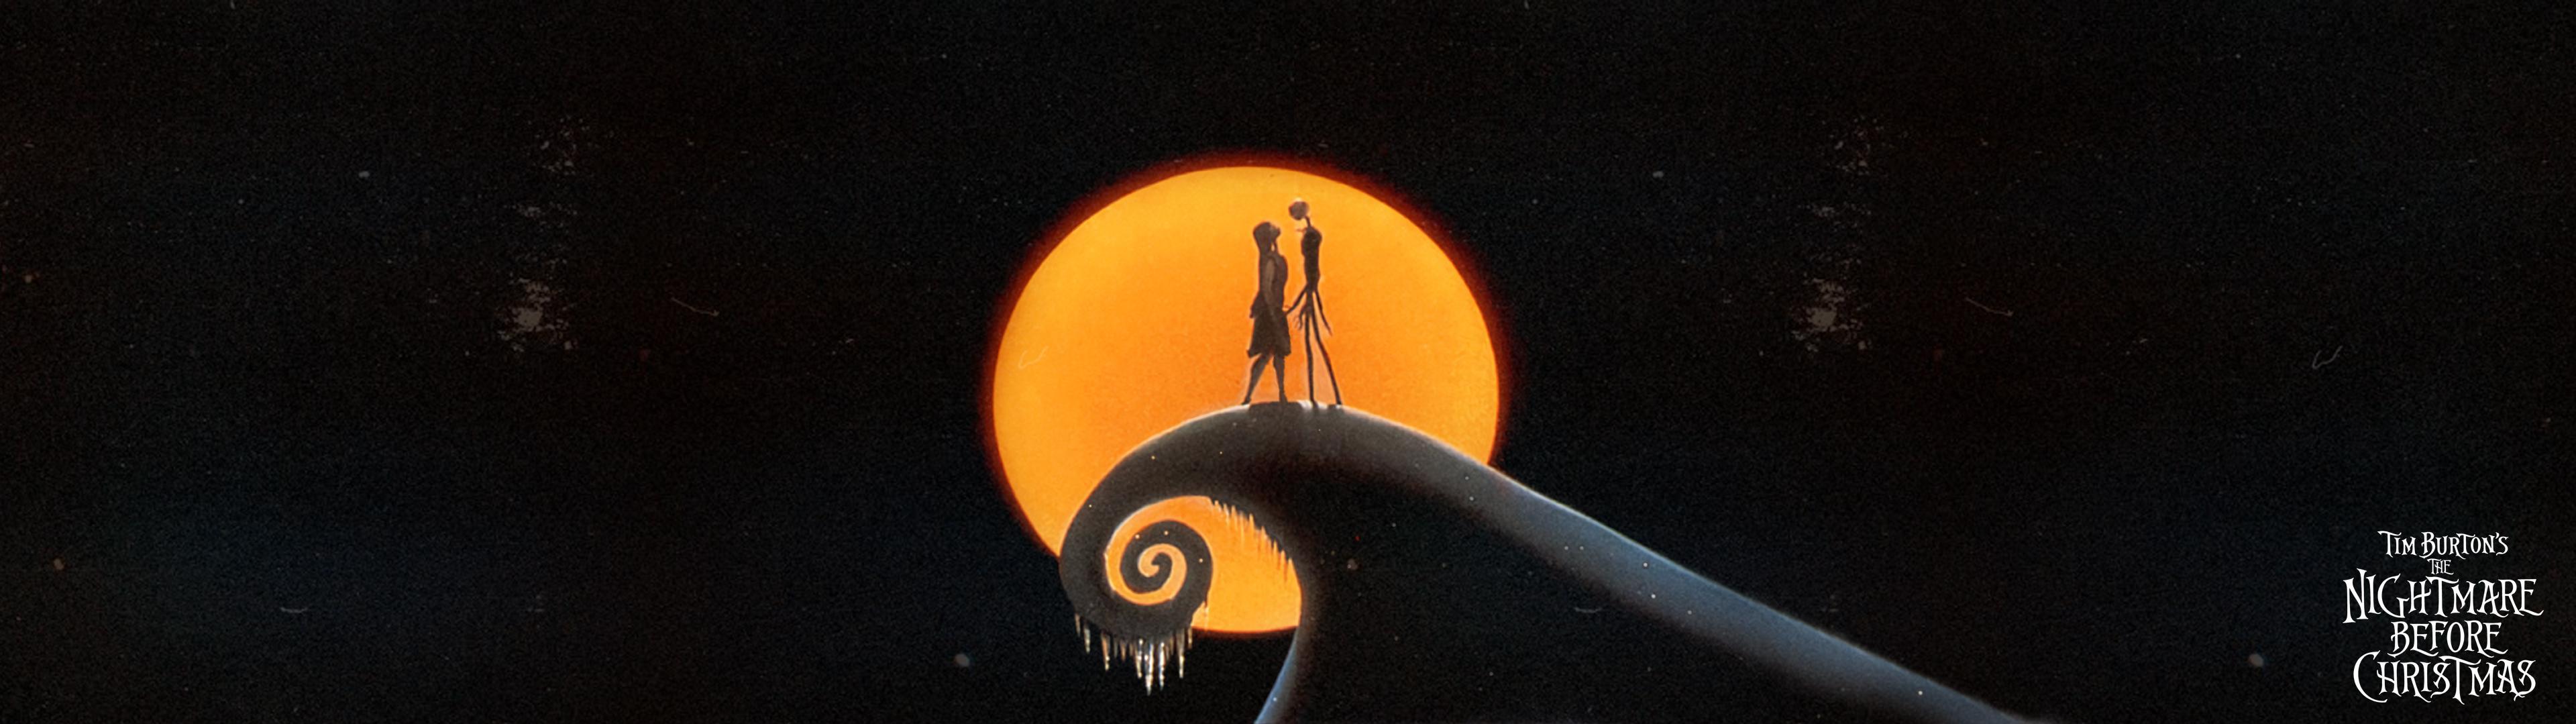 Dual Monitor Nightmare Before Christmas Wallpaper I Spent A Couple